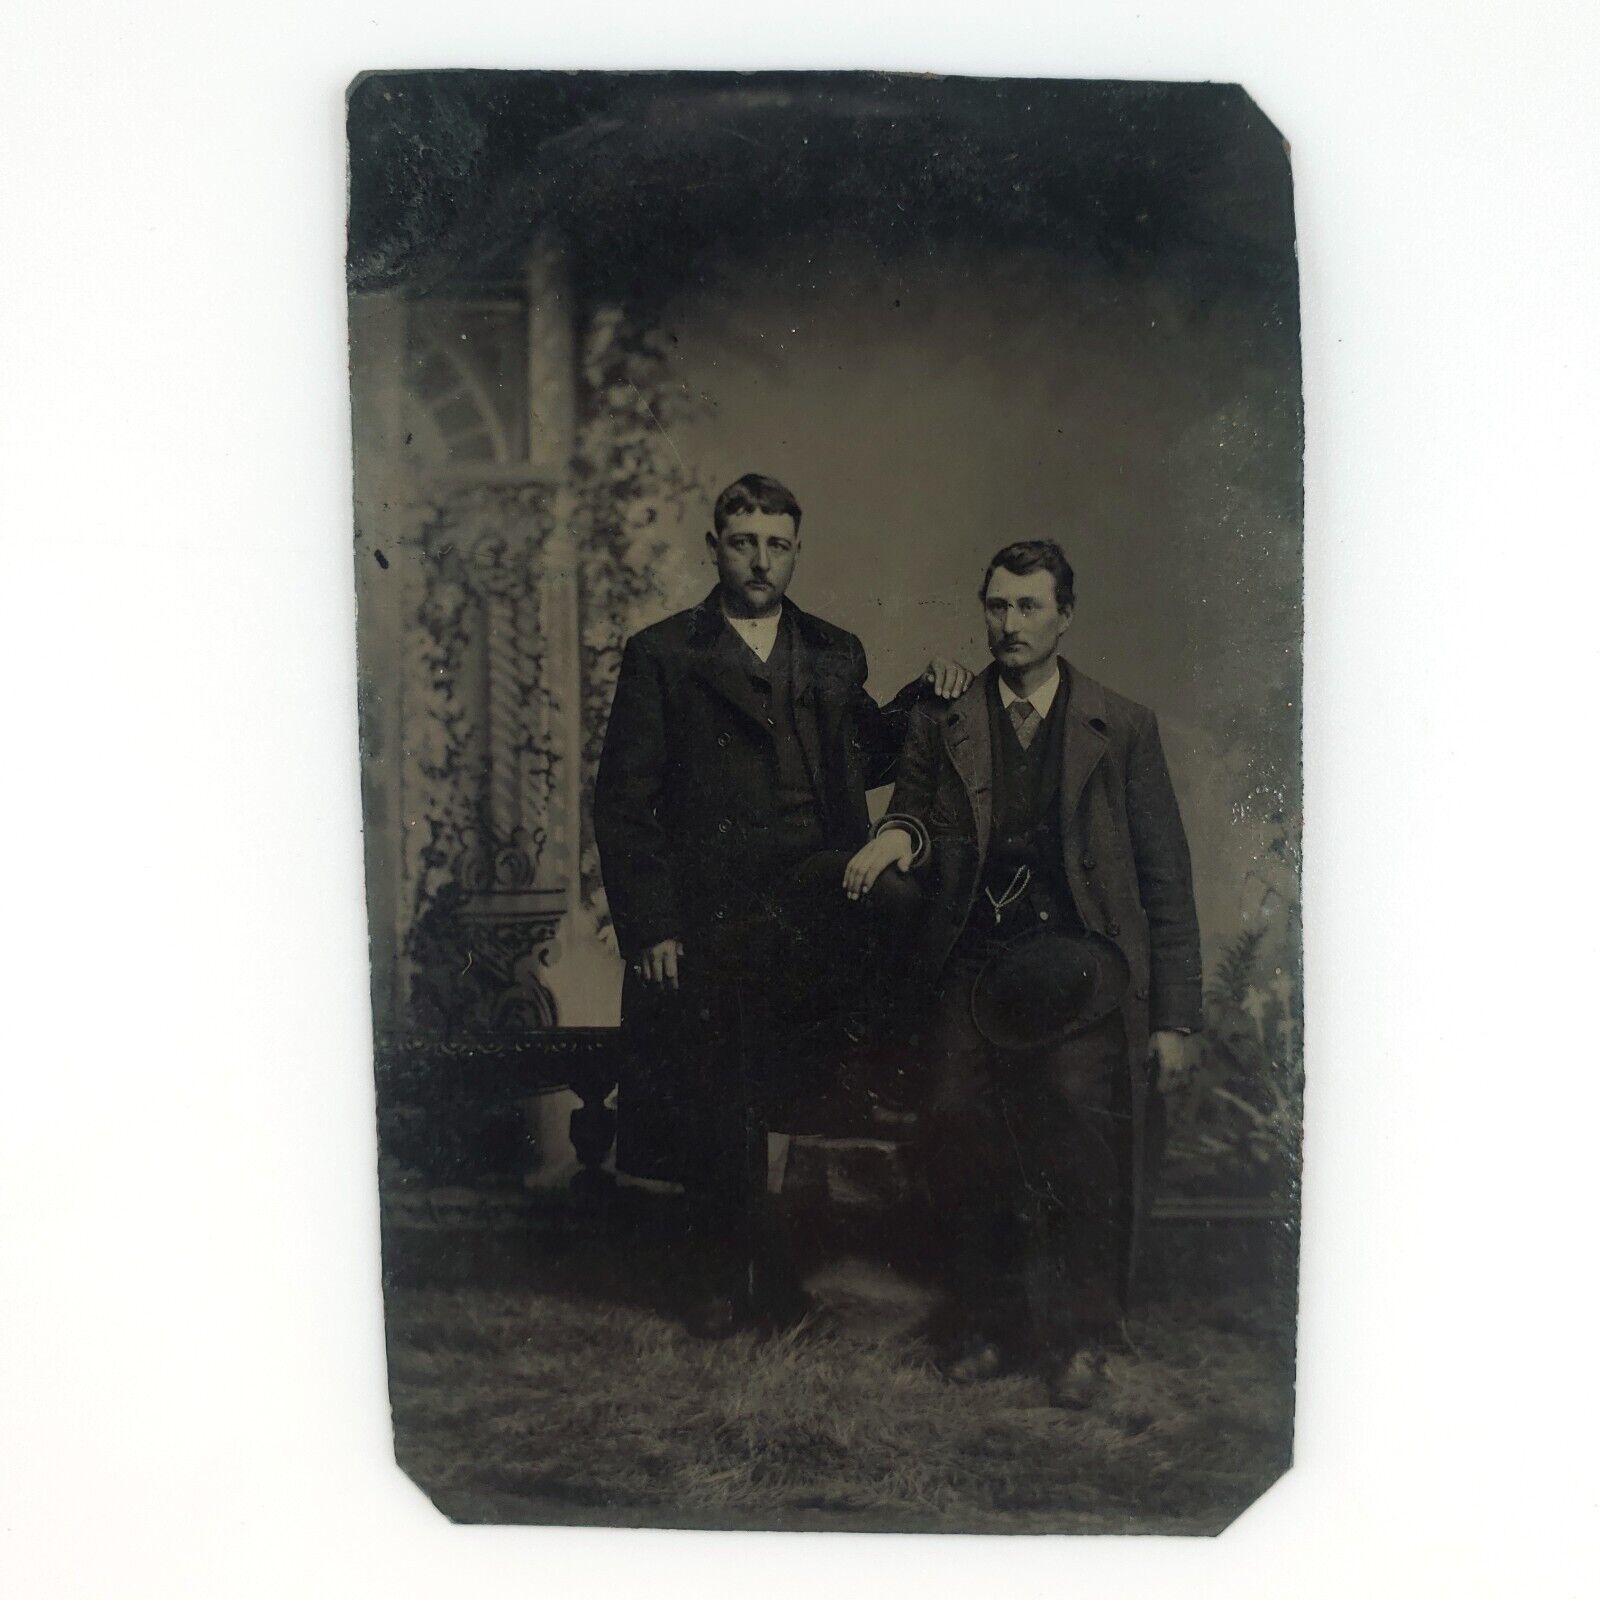 Hands On Thigh Men Tintype c1864 Antique 1/6 Plate Gay Interest Boys Photo H681